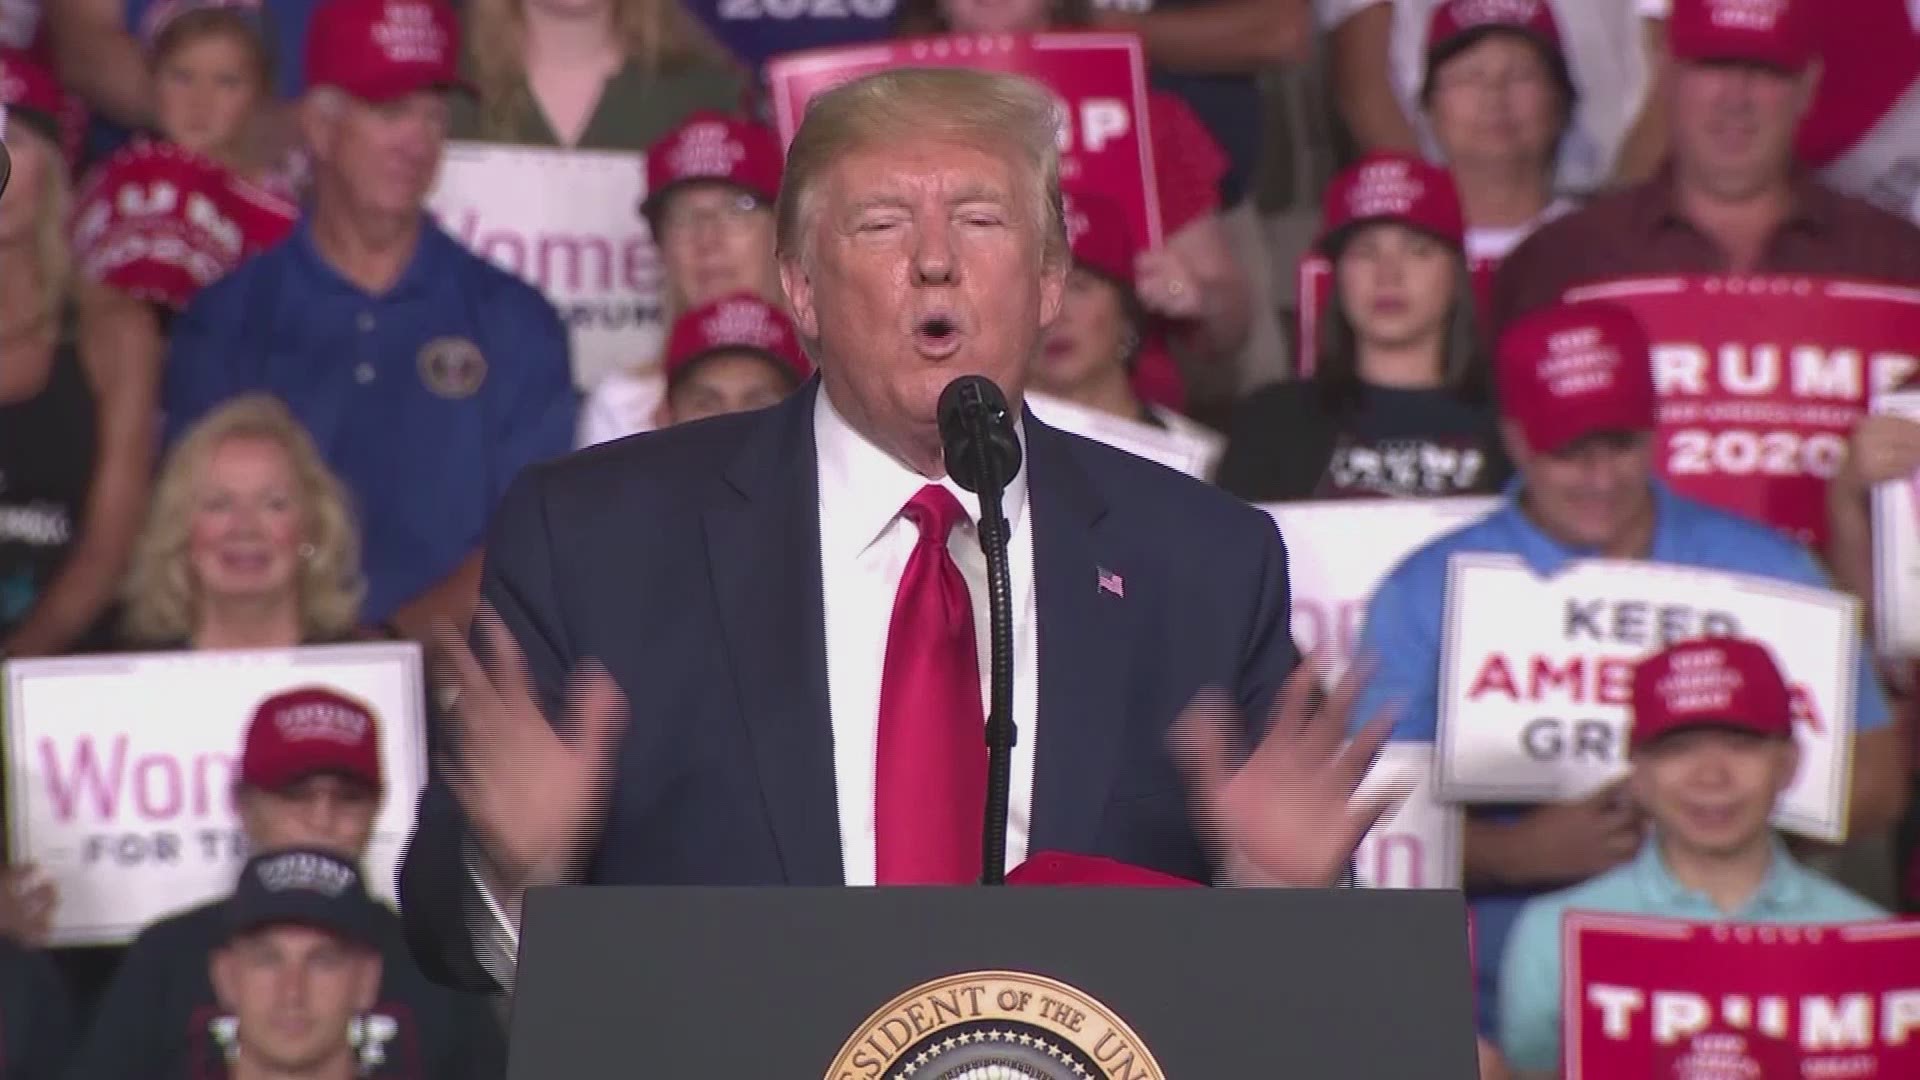 President Trump emphasized that the country would be at an economic loss if he isn't reelected, stating, "You have no choice but to vote for me."